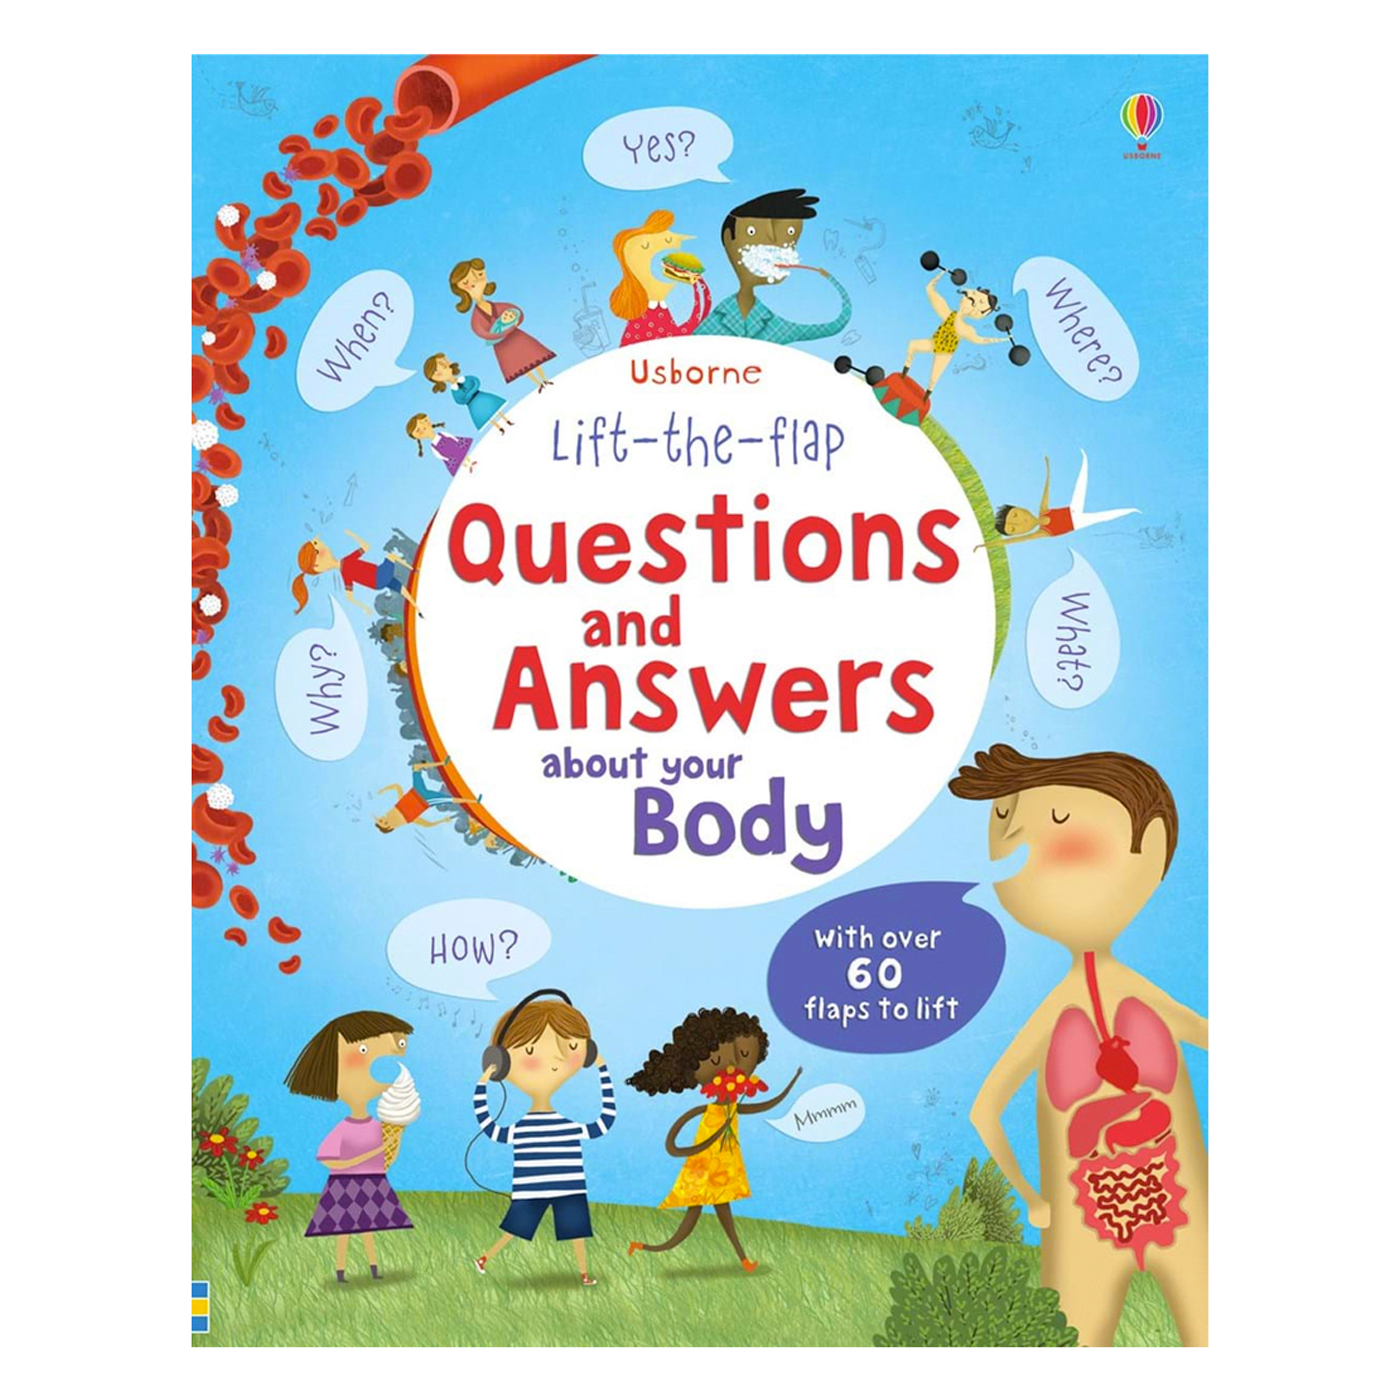  Questions and Answers: about your Body